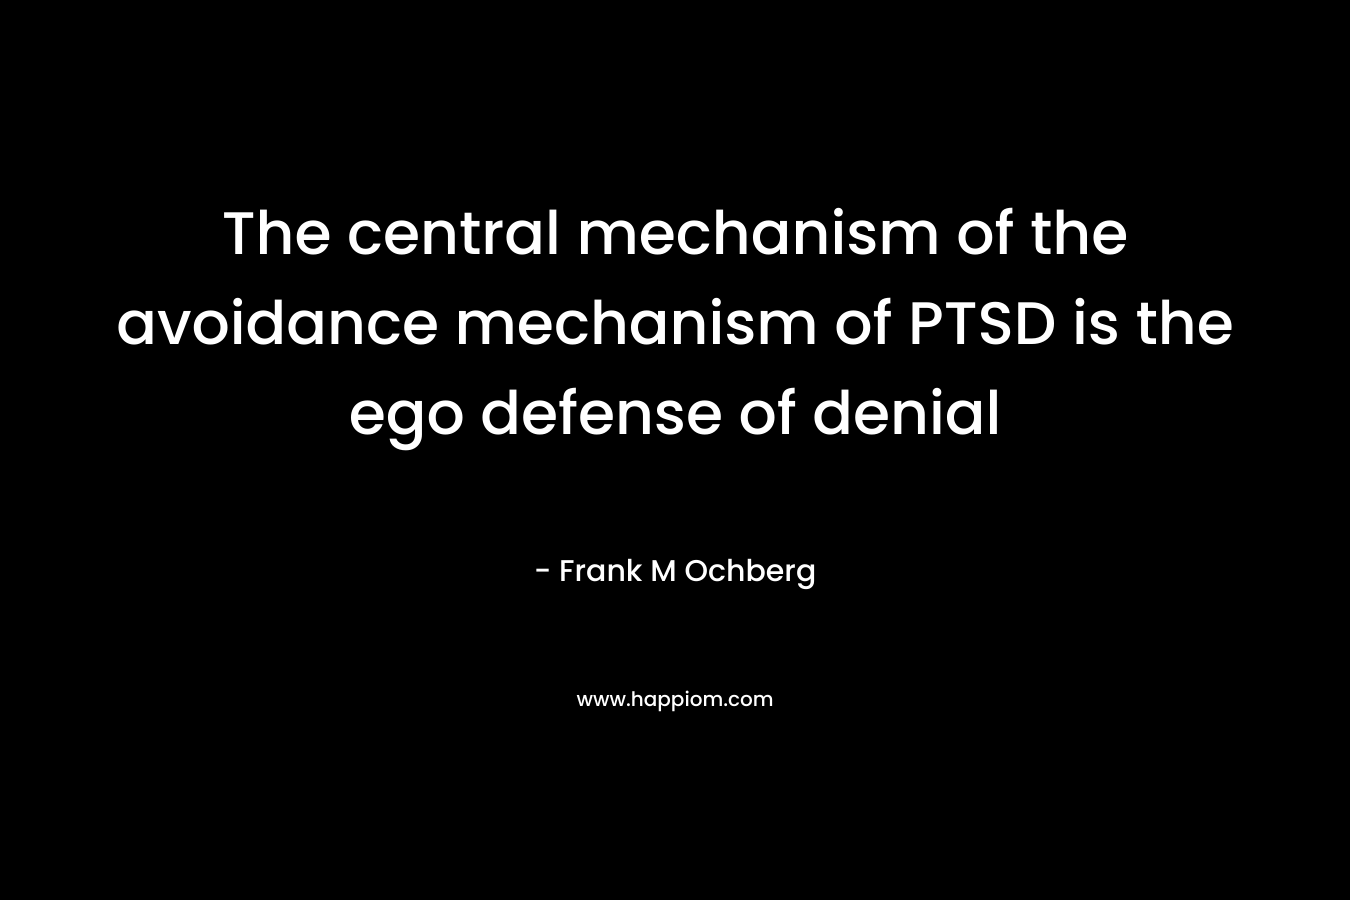 The central mechanism of the avoidance mechanism of PTSD is the ego defense of denial